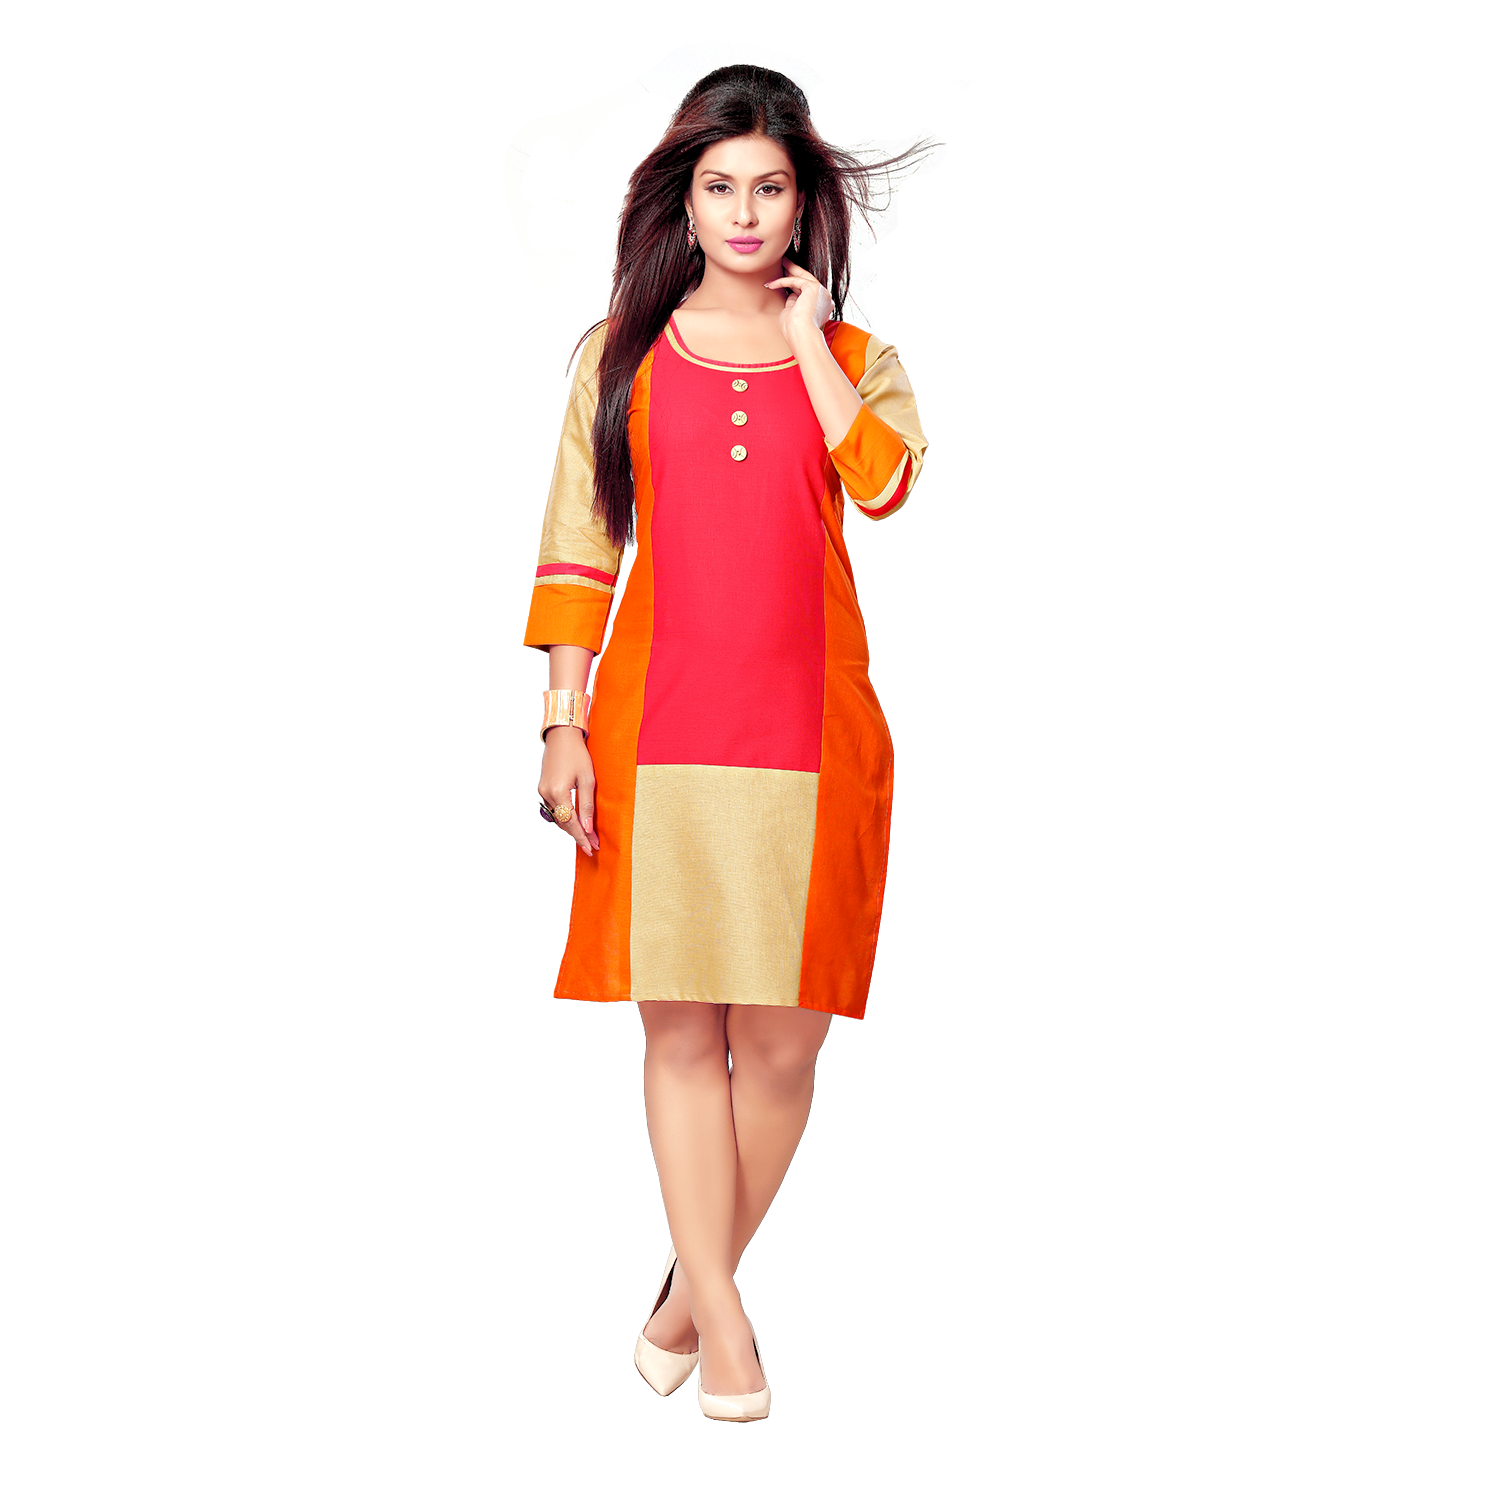 Yuri S Multicoloured Cotton Straight Kurti Buy Yuri S Multicoloured Cotton Straight Kurti Online At Best Prices In India On Snapdeal